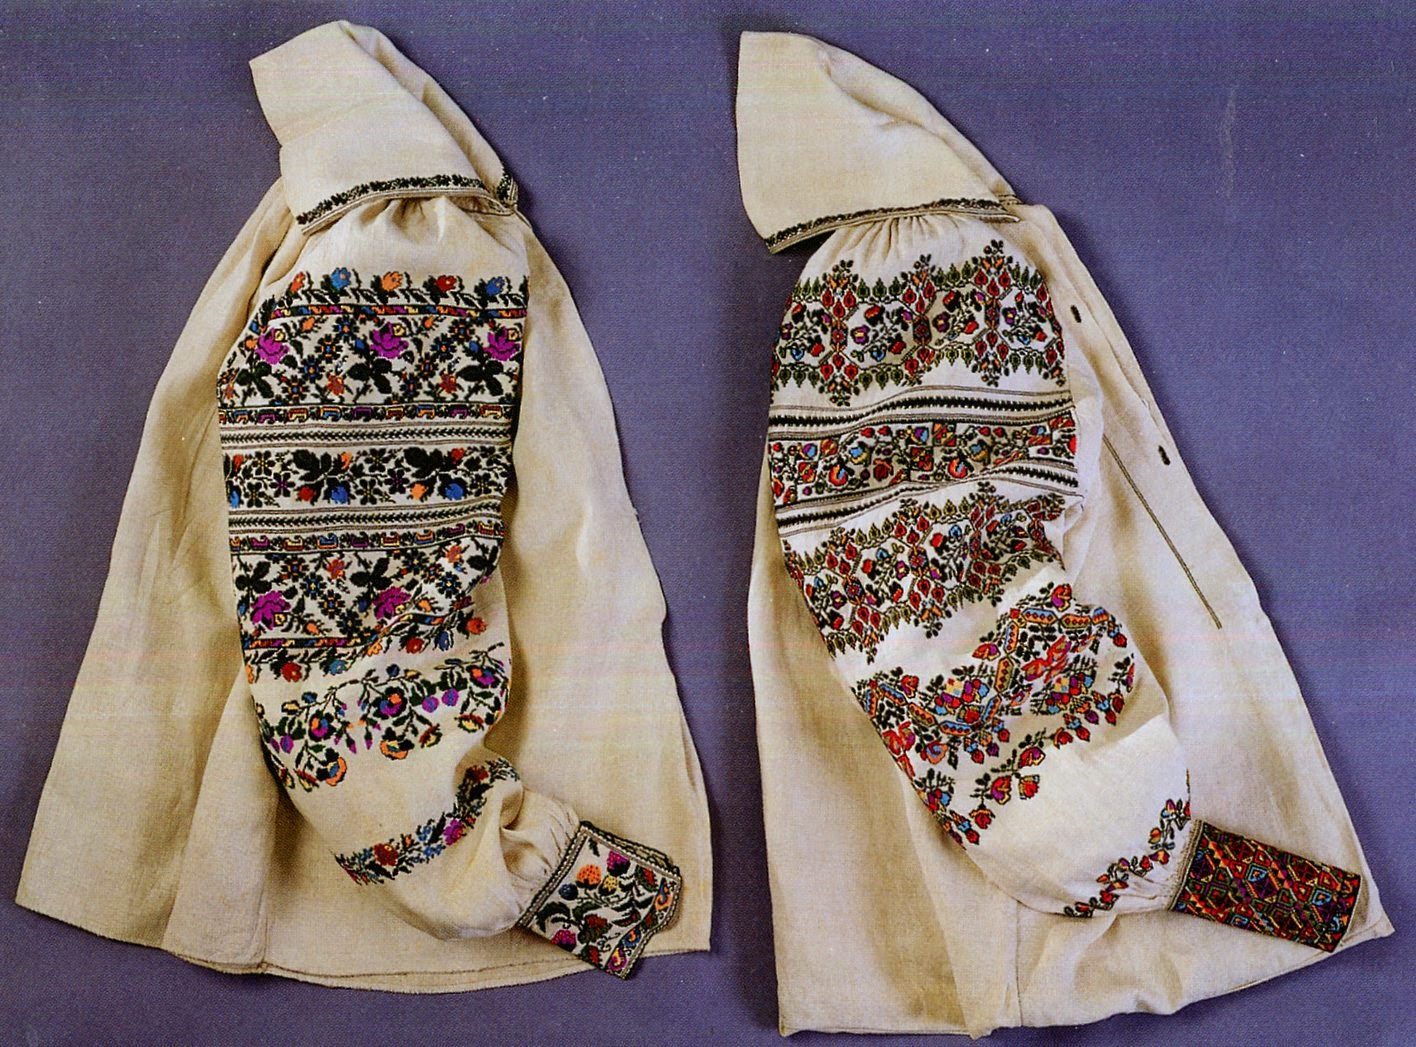 FolkCostume&Embroidery: More on the costume and embroideryl from Sokal ...